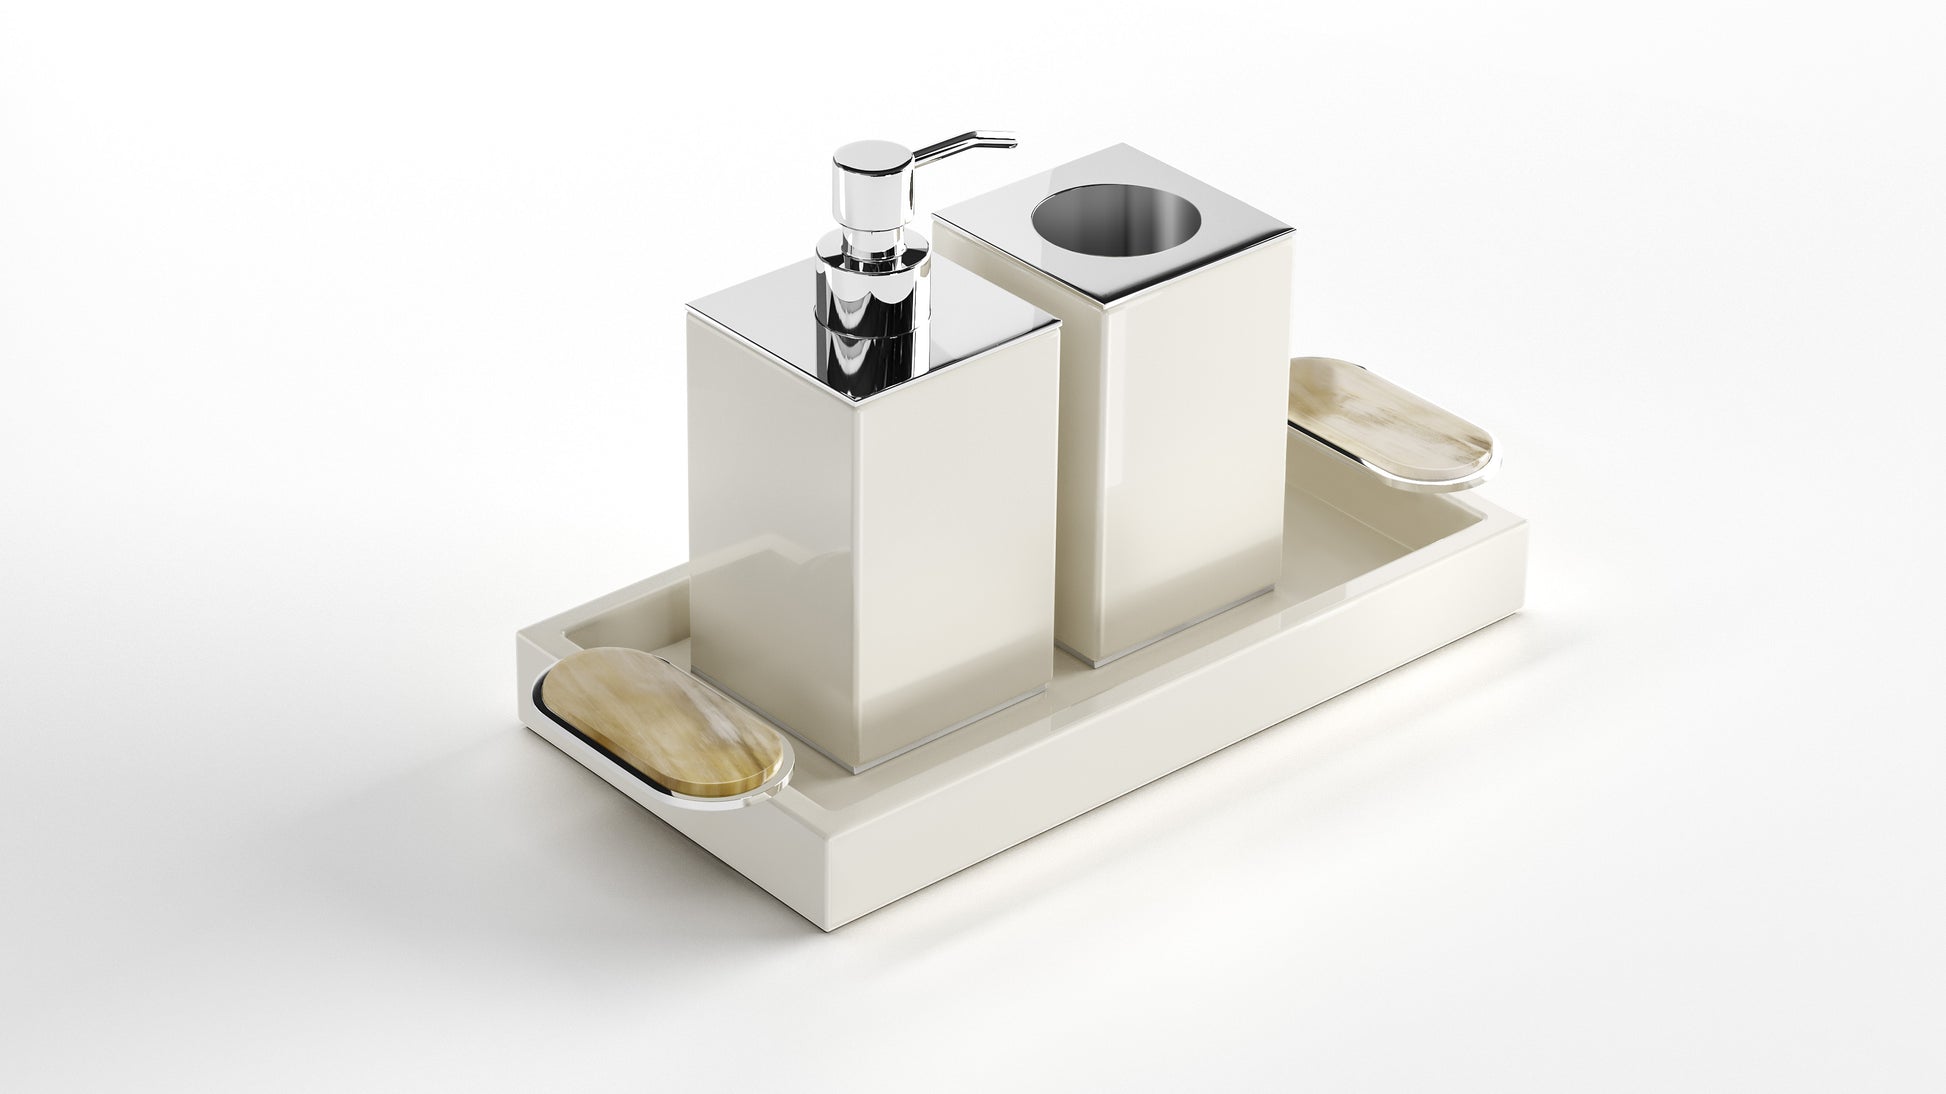 Arcahorn Argentella Toothbrush Holder | Wood with Lacquered Ivory Gloss Finish | Chromed Brass Detail | Elegant Bathroom Accessory | Perfect for Yacht Decor | Explore a Range of Luxury Home Accessories at 2Jour Concierge, #1 luxury high-end gift & lifestyle shop